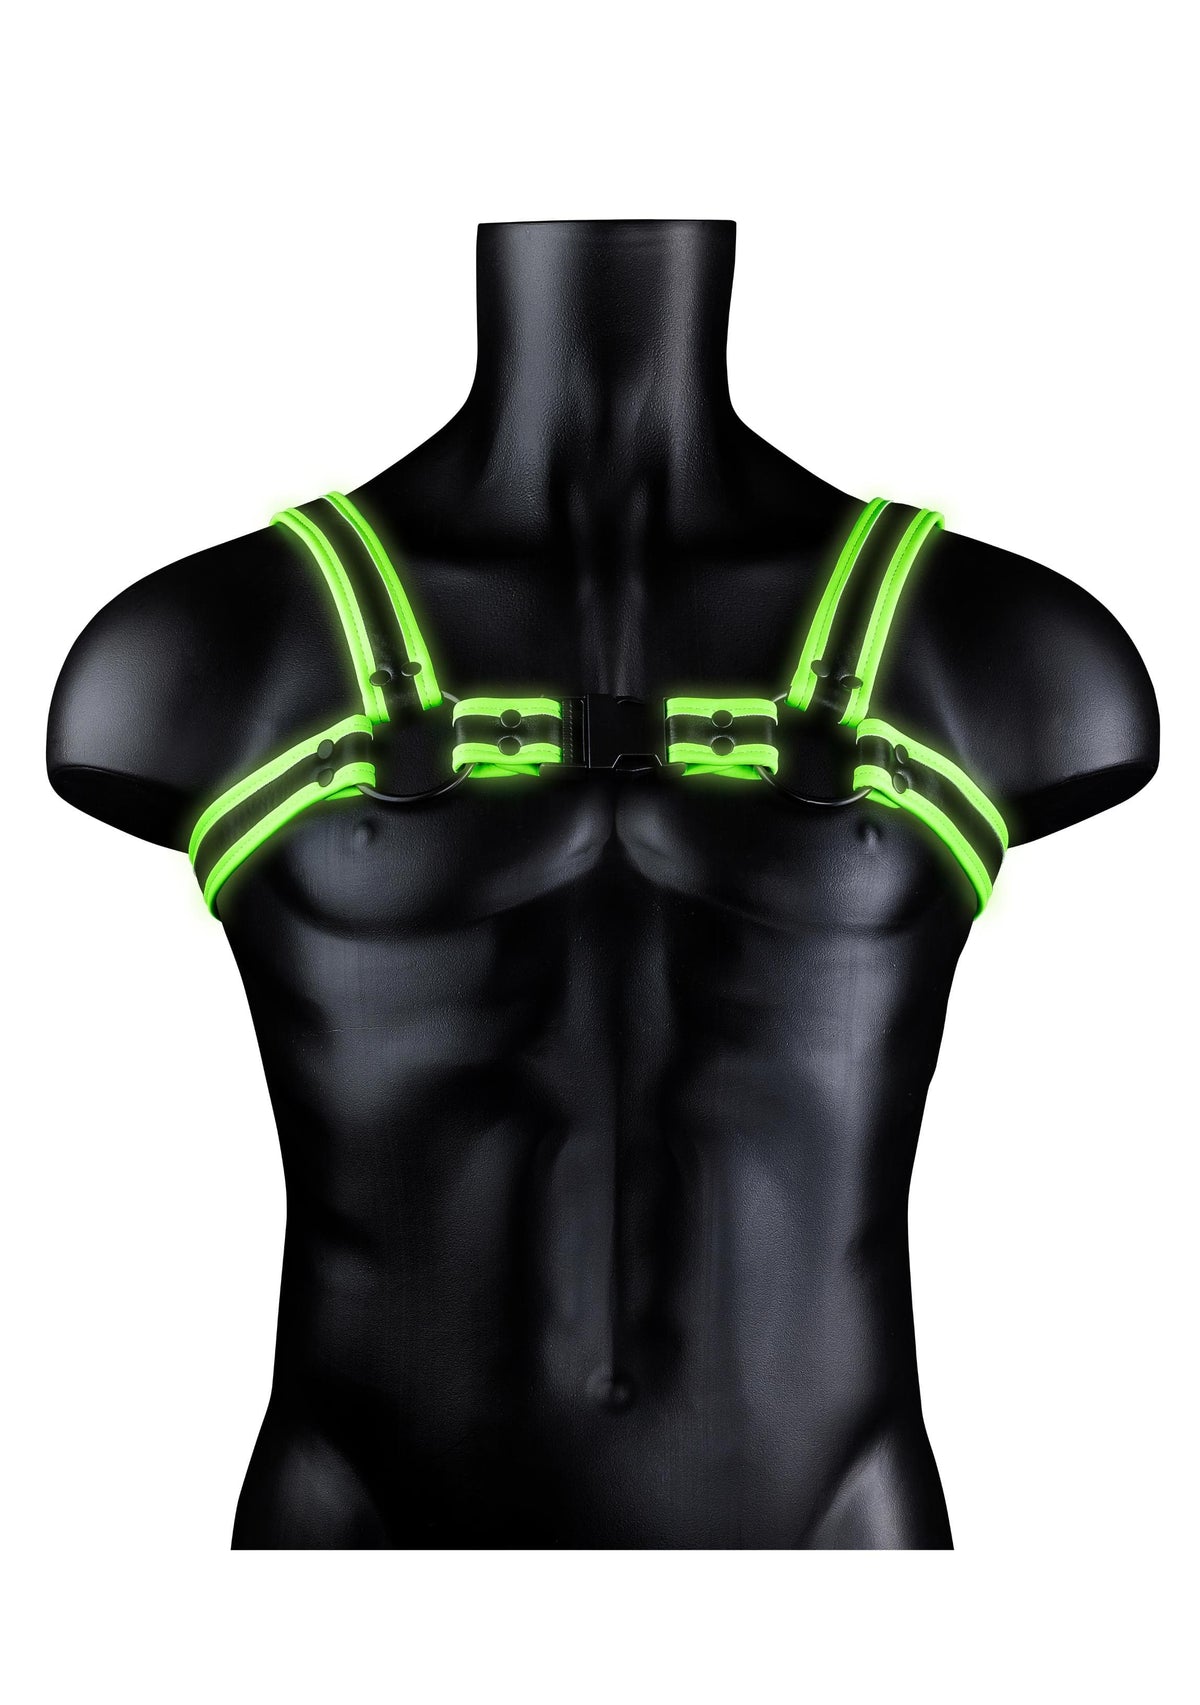 bonded leather buckle harness large xlarge glow in the dark